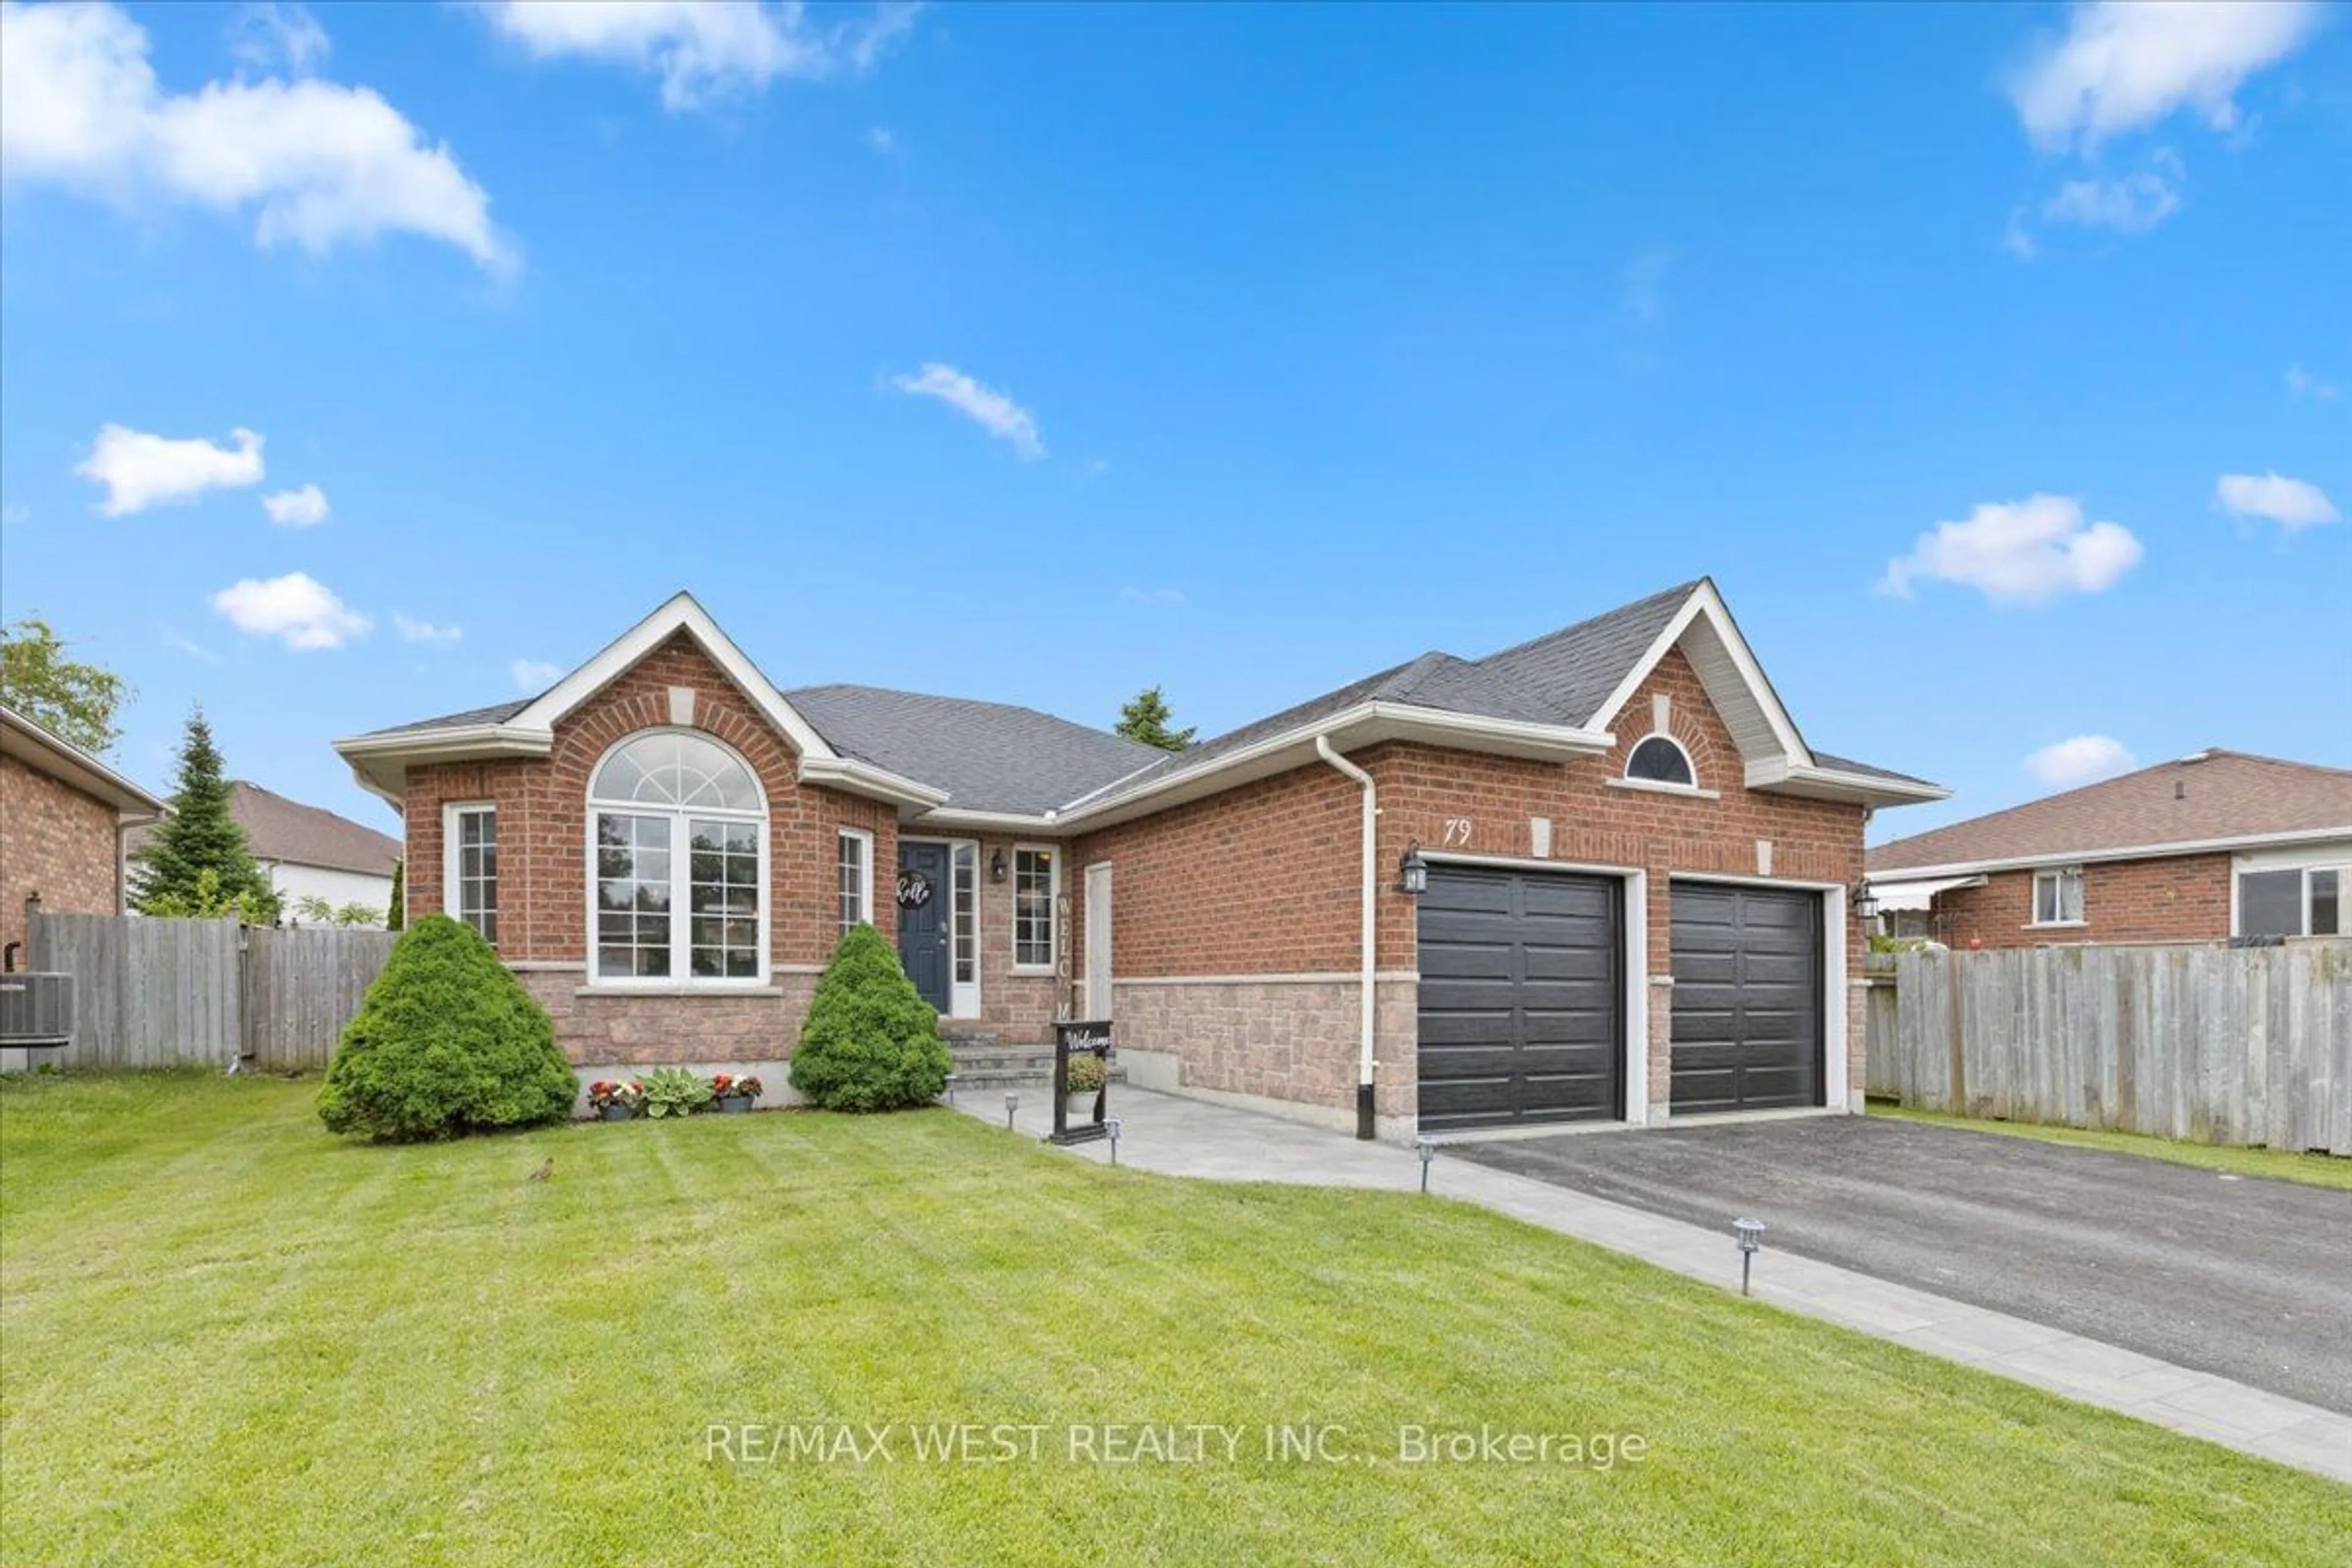 Home with brick exterior material for 79 Marsellus Dr, Barrie Ontario L4N 8R6